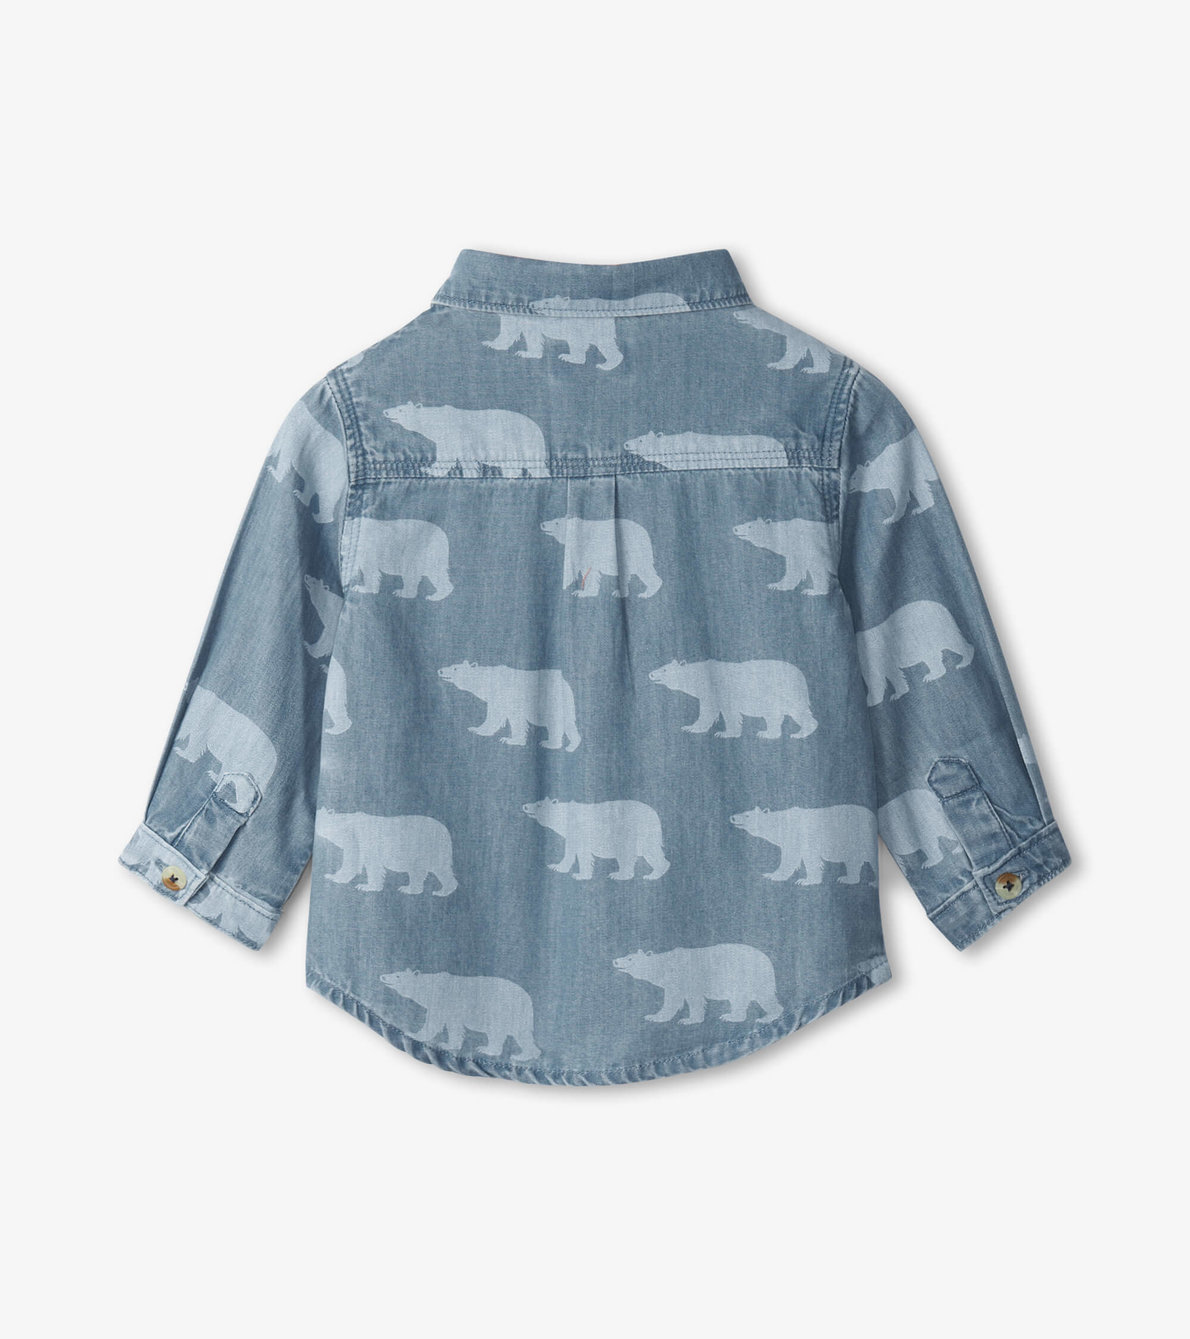 View larger image of Winter Cubs Baby Button Down Shirt